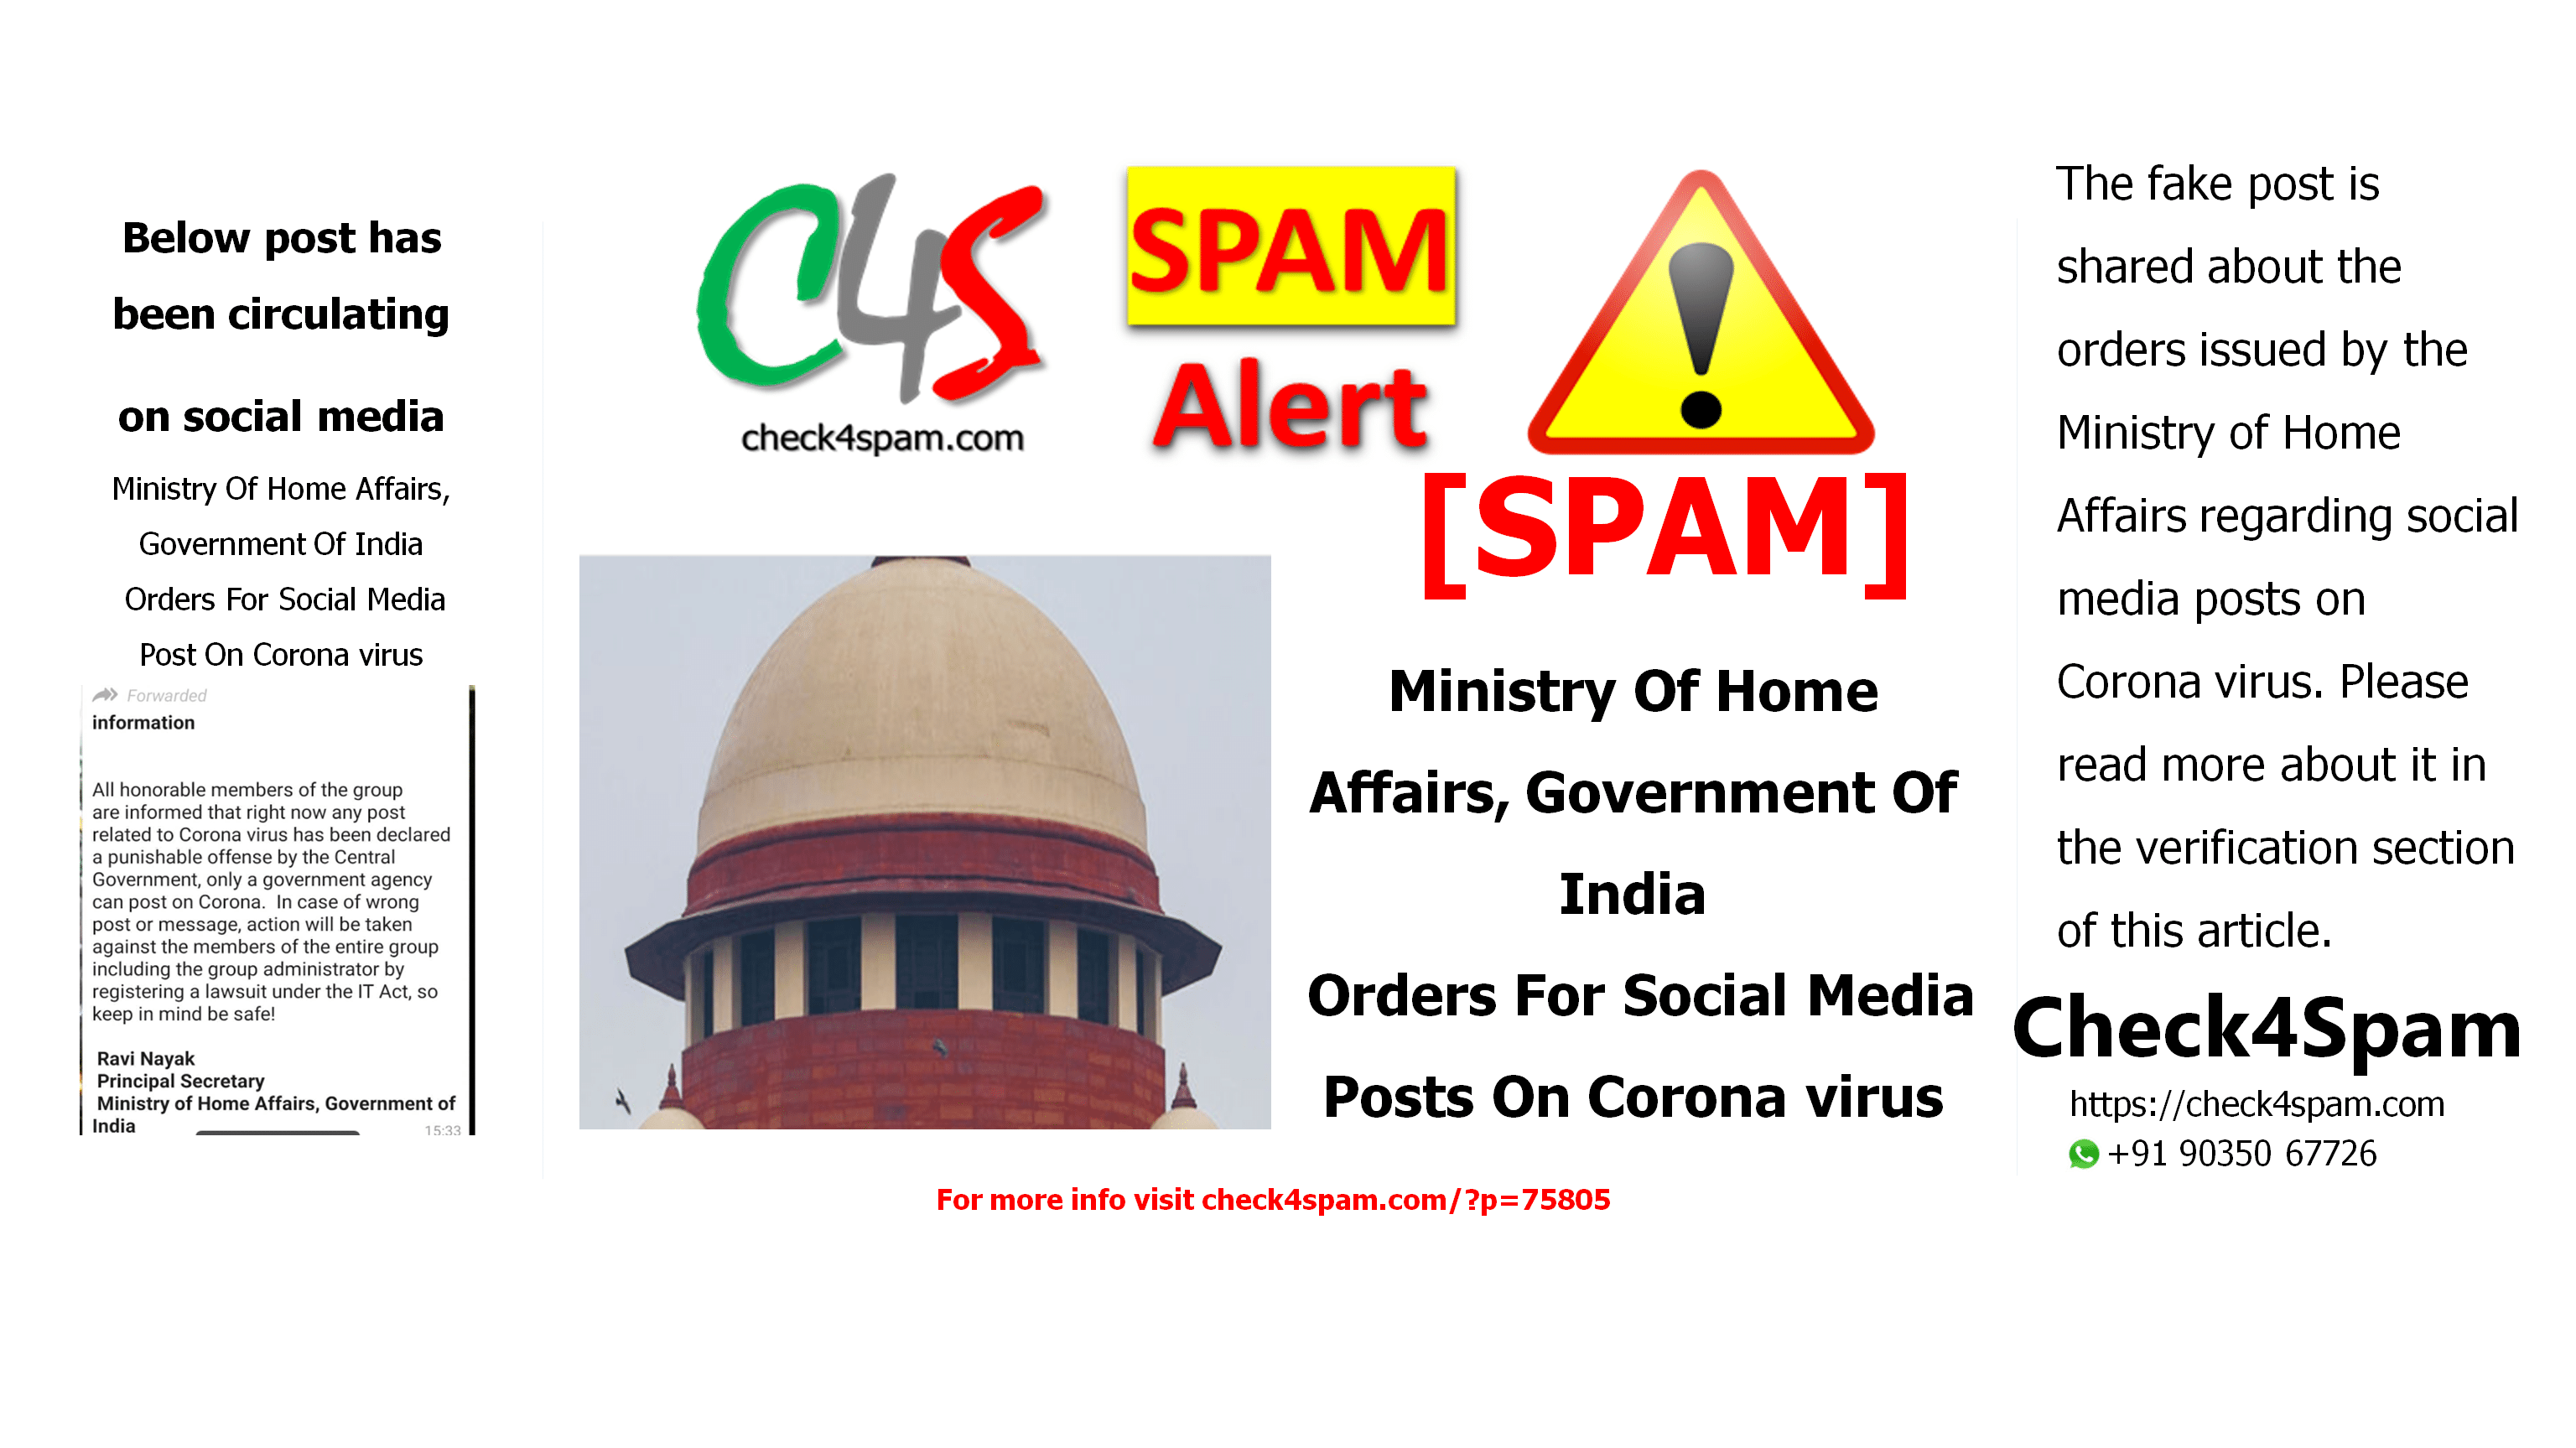 Ministry Of Home Affairs, Government Of India Orders For Social Media Post On Coronavirus